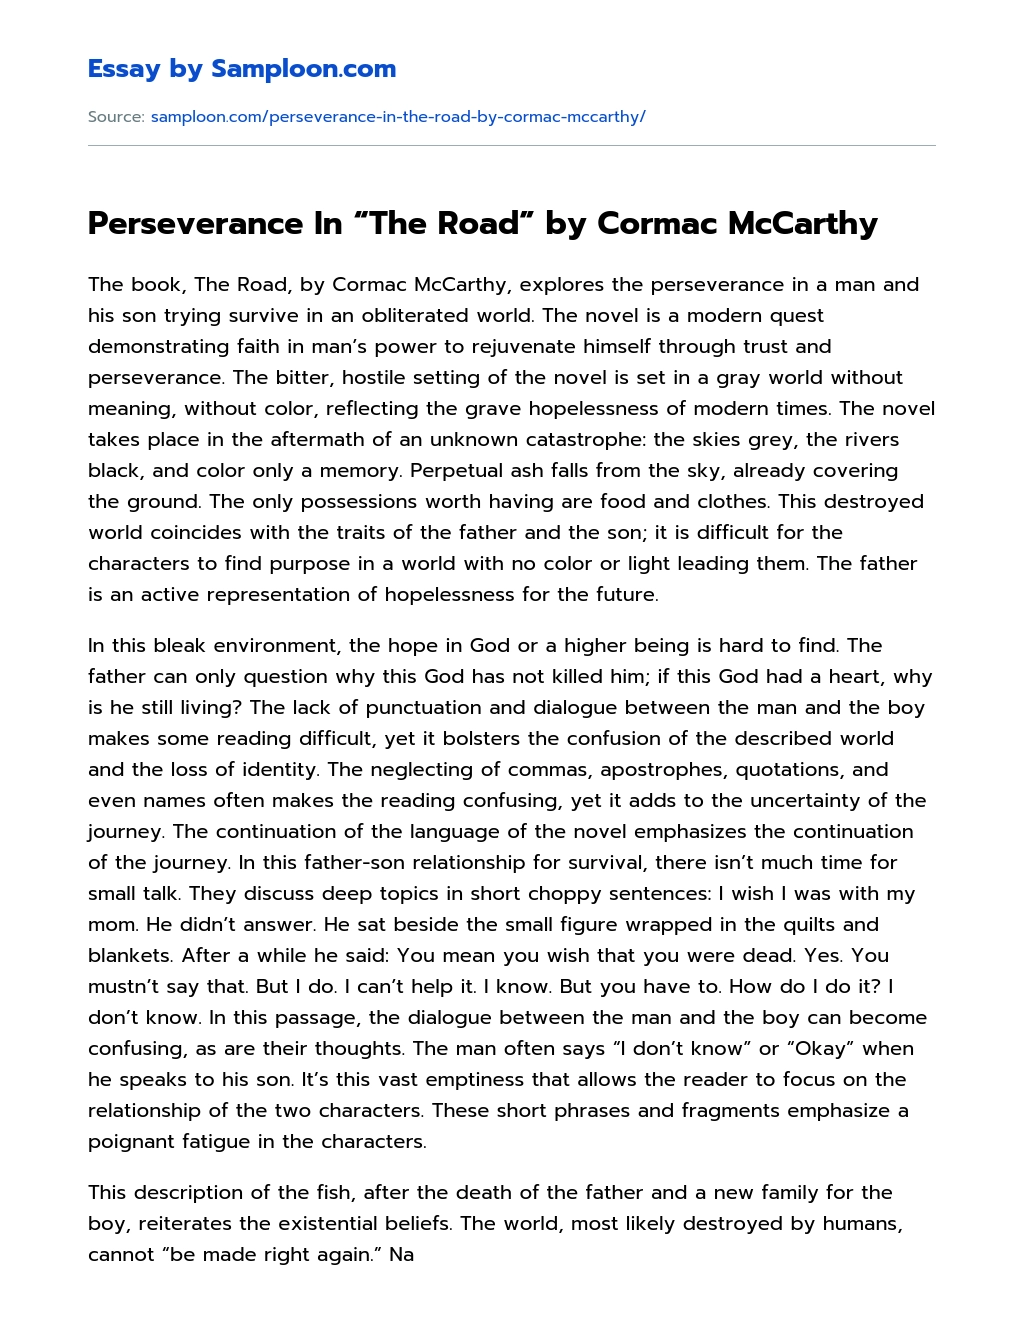 Perseverance In “The Road” by Cormac McCarthy Literary Analysis essay